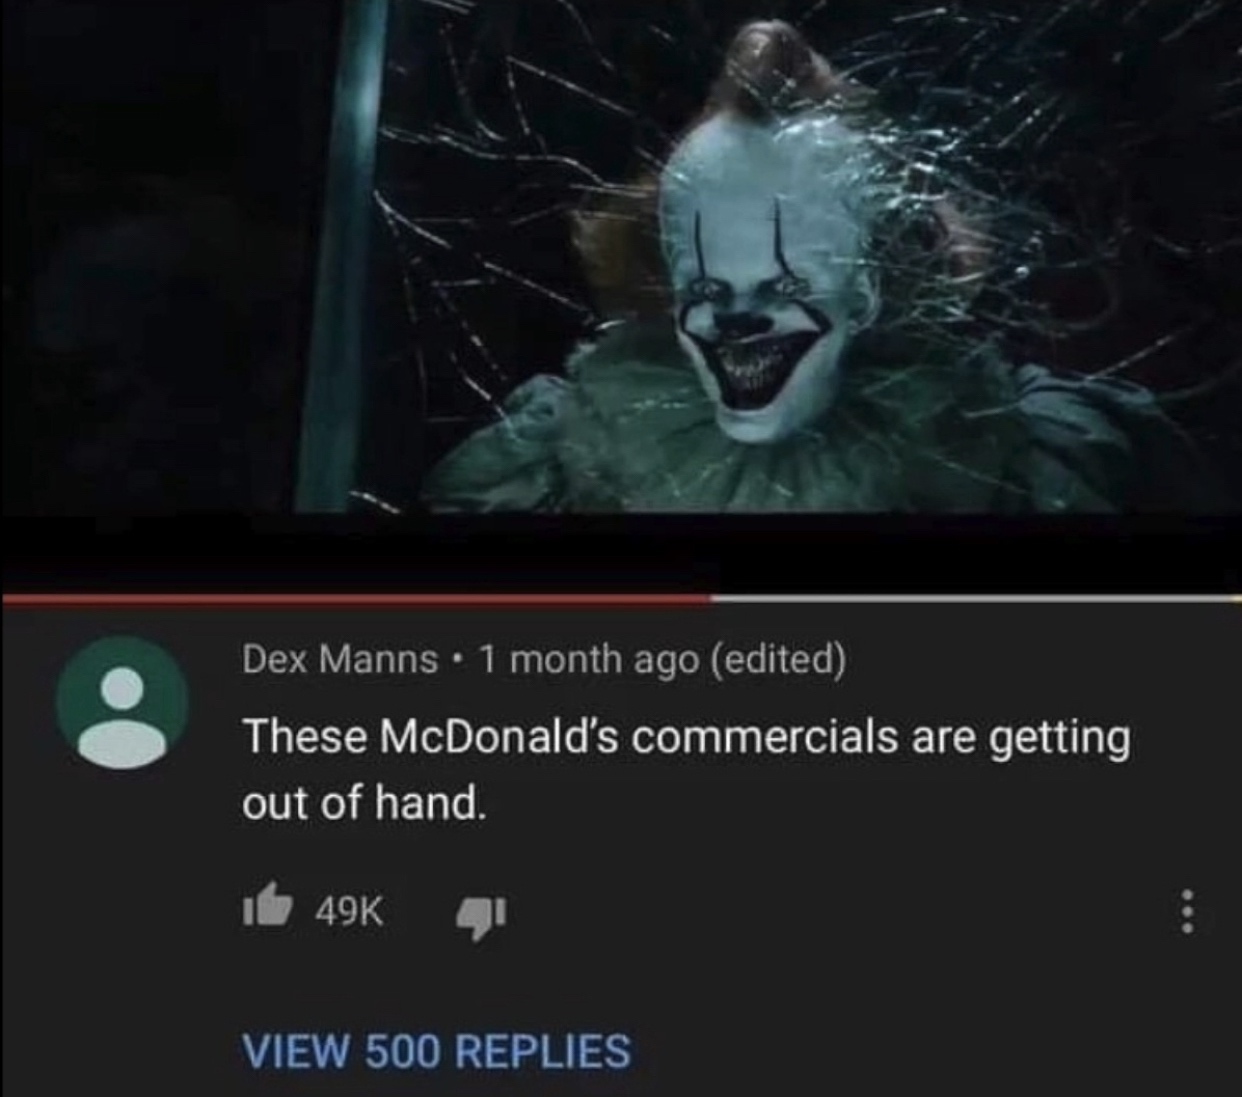 these mcdonalds commercials are getting out of hand - Dex Manns. 1 month ago edited These McDonald's commercials are getting out of hand. 1h 49K View 500 Replies